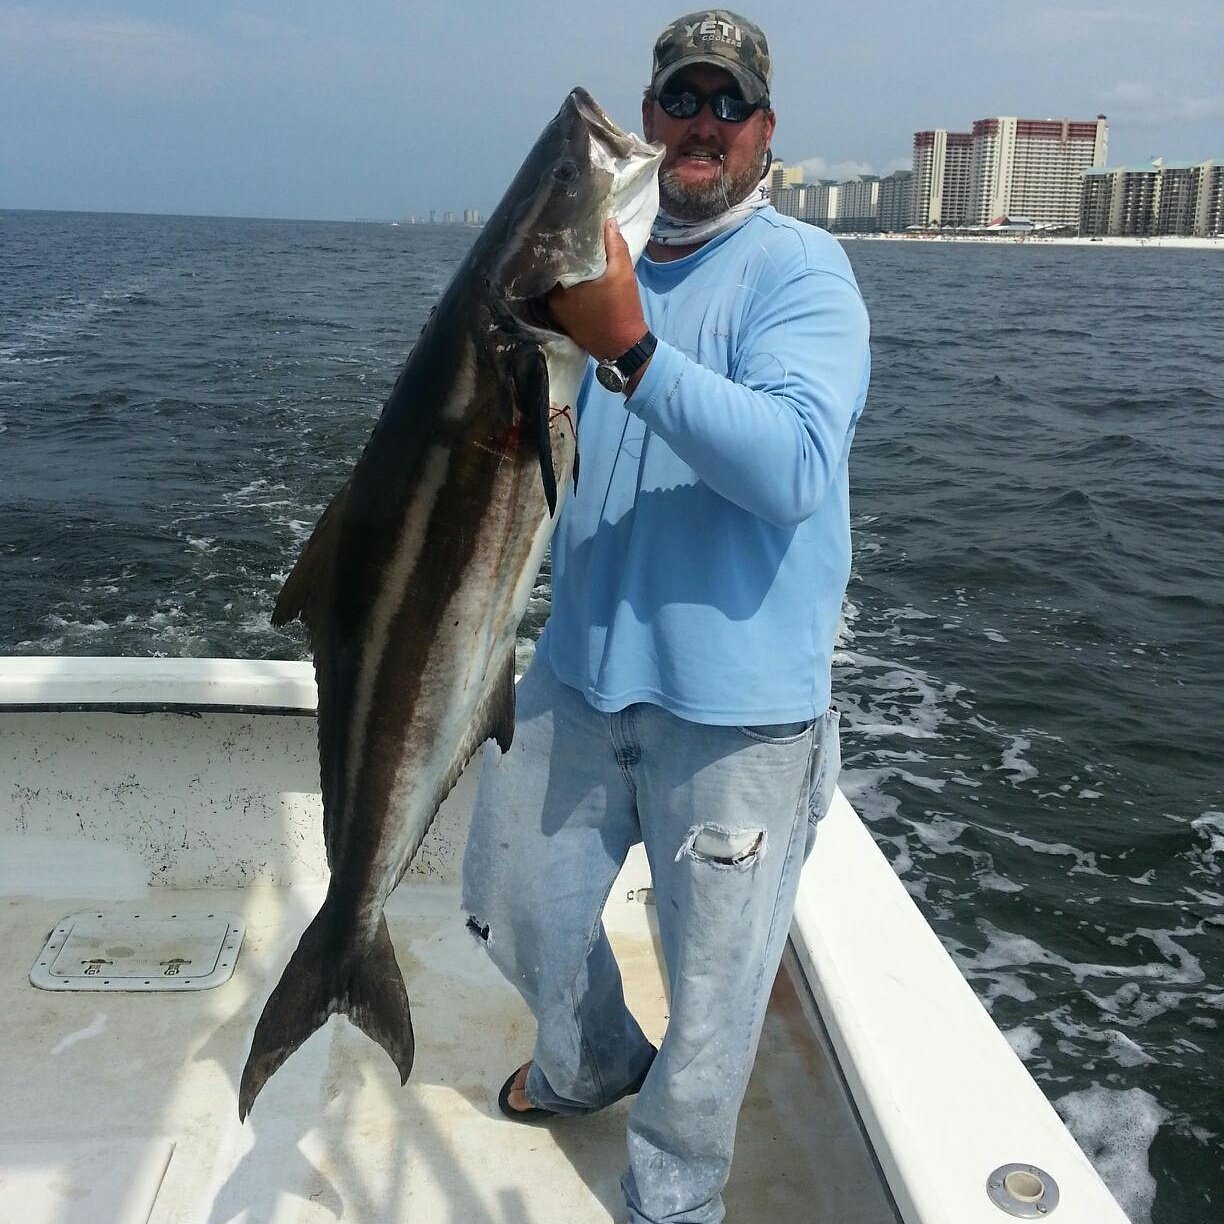 Captain Larry showing off a Cobia